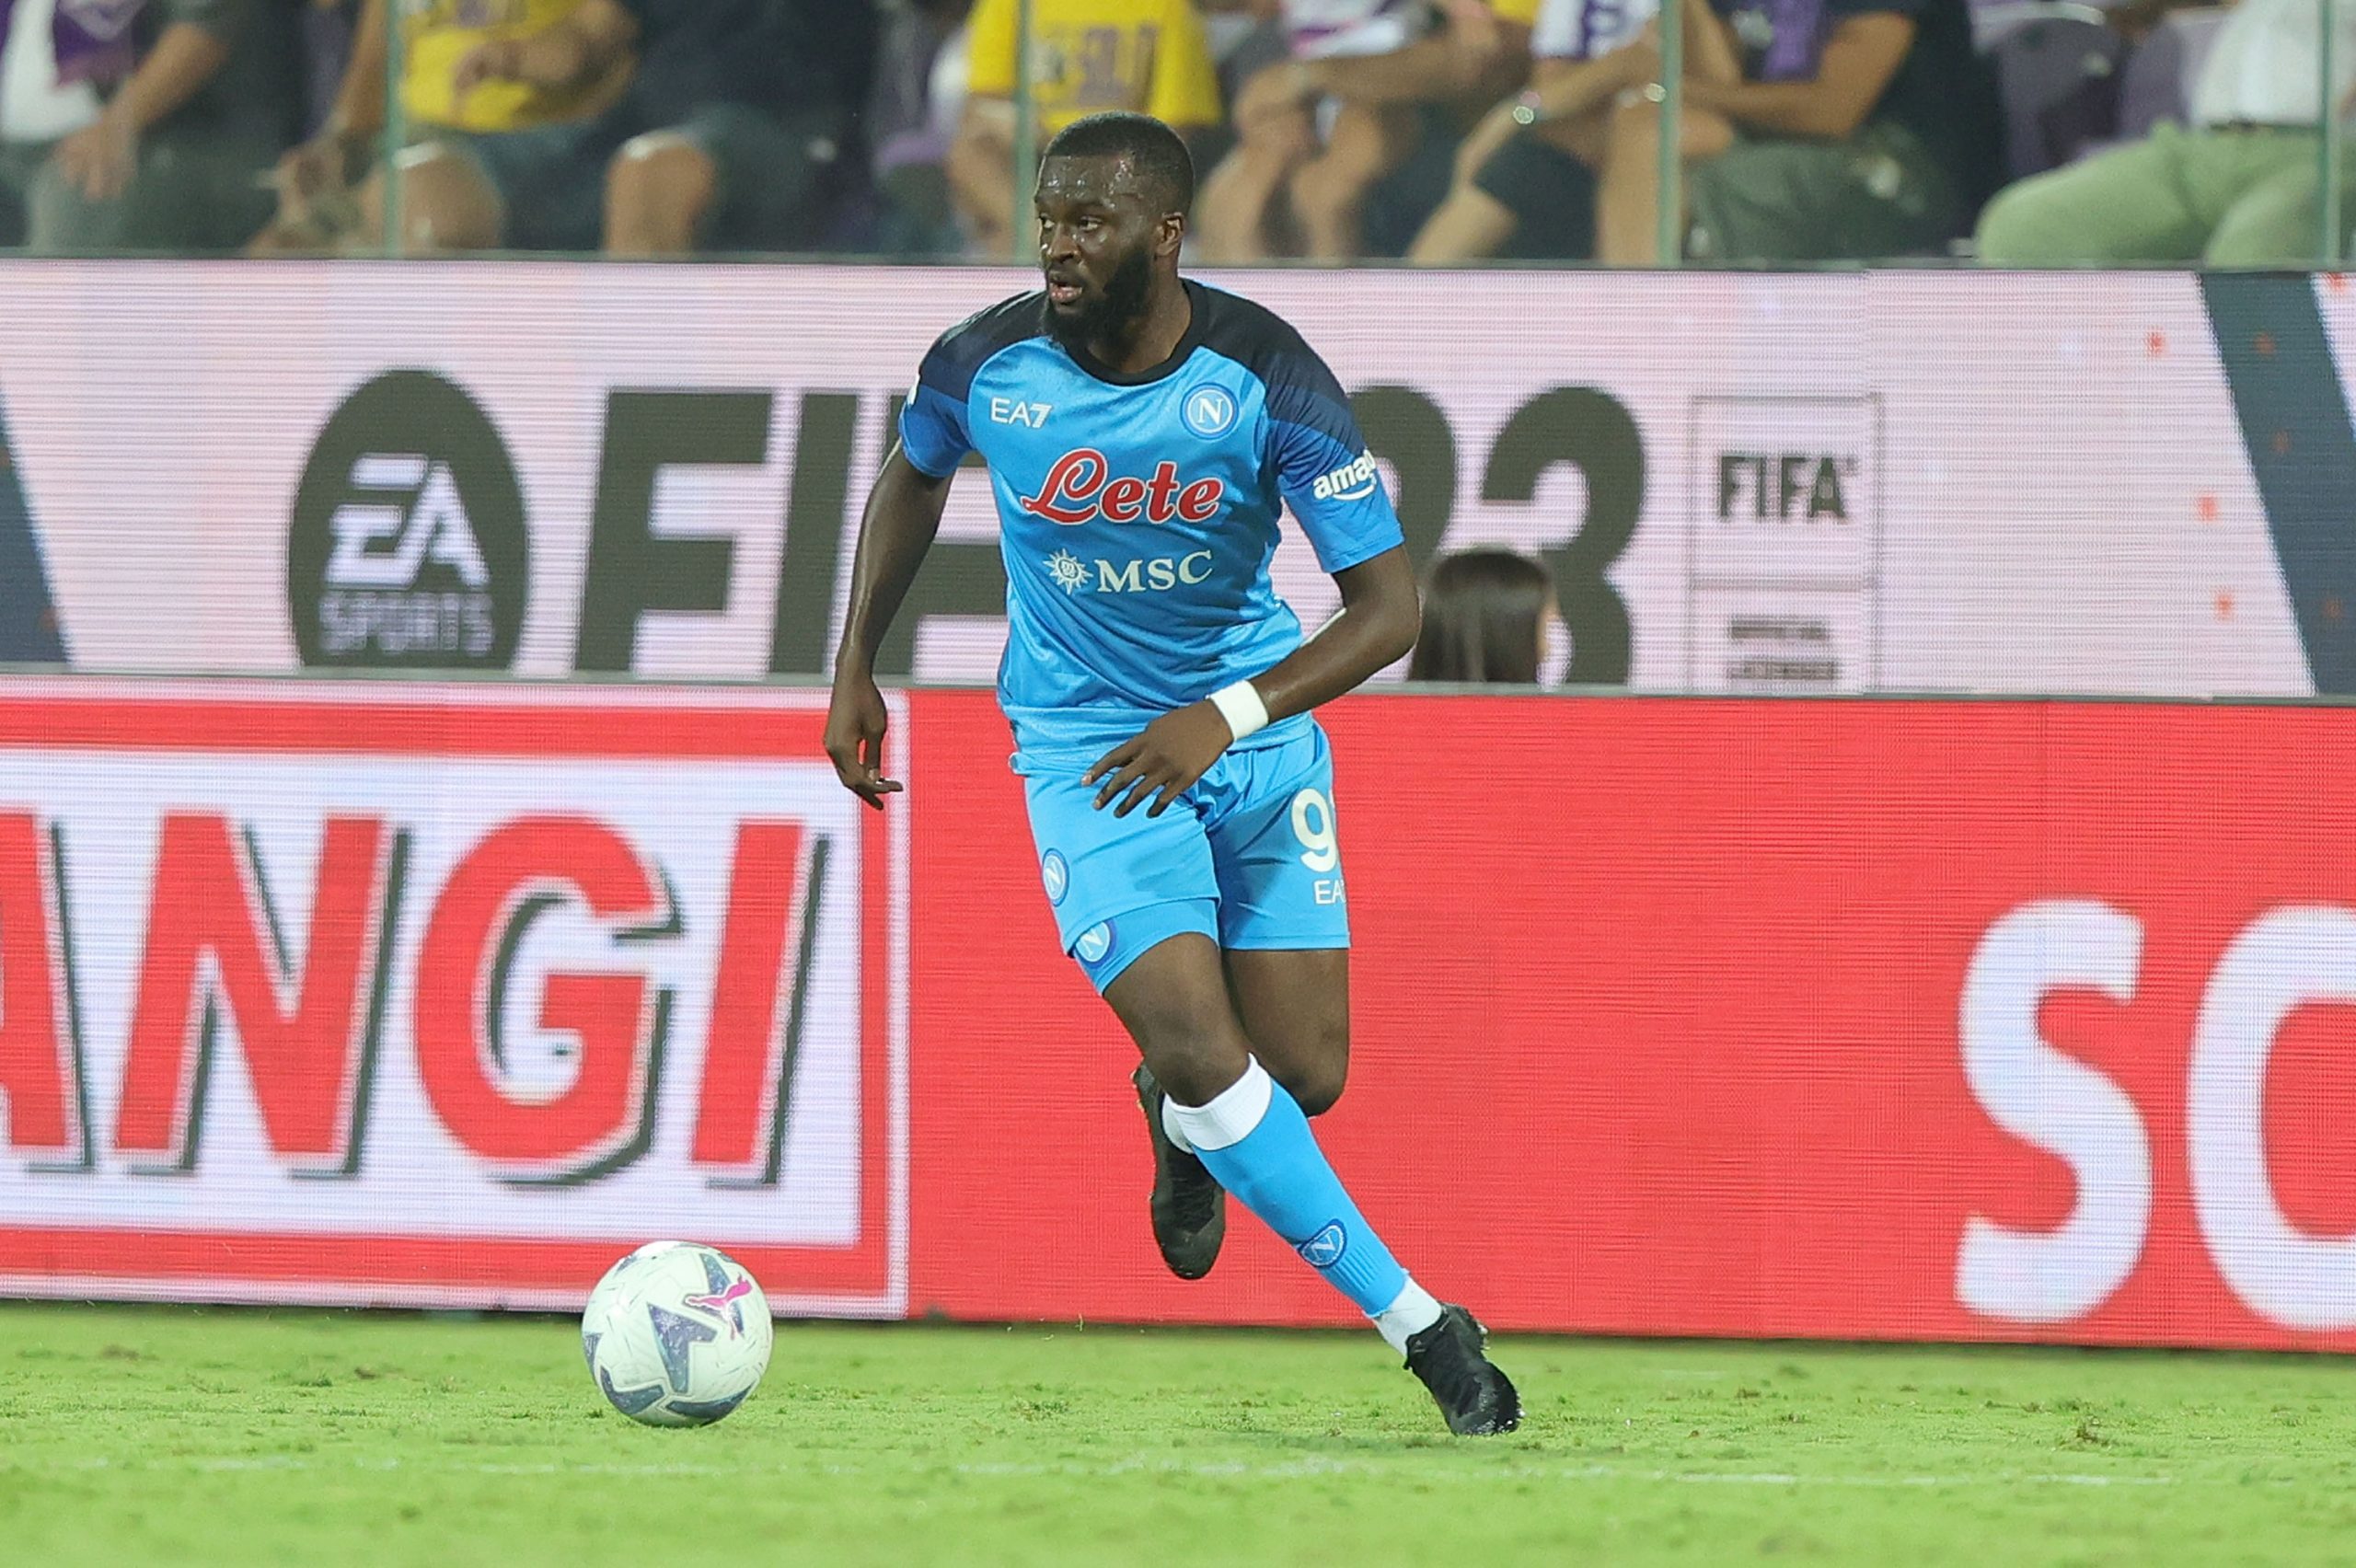 Tanguy Ndombele of SSC Napoli in action during the Serie A match against ACF Fiorentina.